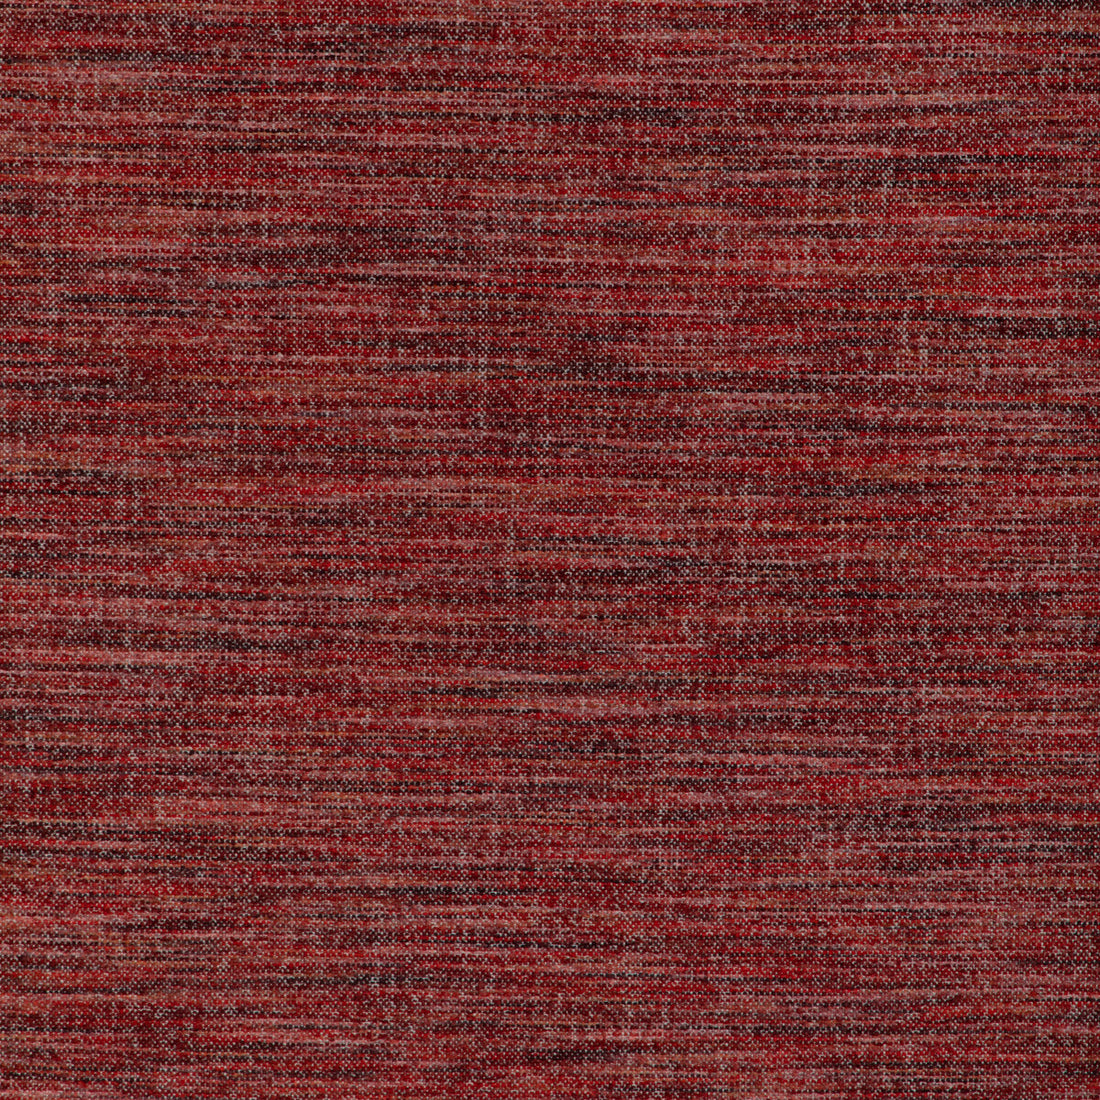 Combes Texture fabric in red color - pattern 8023131.99.0 - by Brunschwig &amp; Fils in the Arles Weaves collection